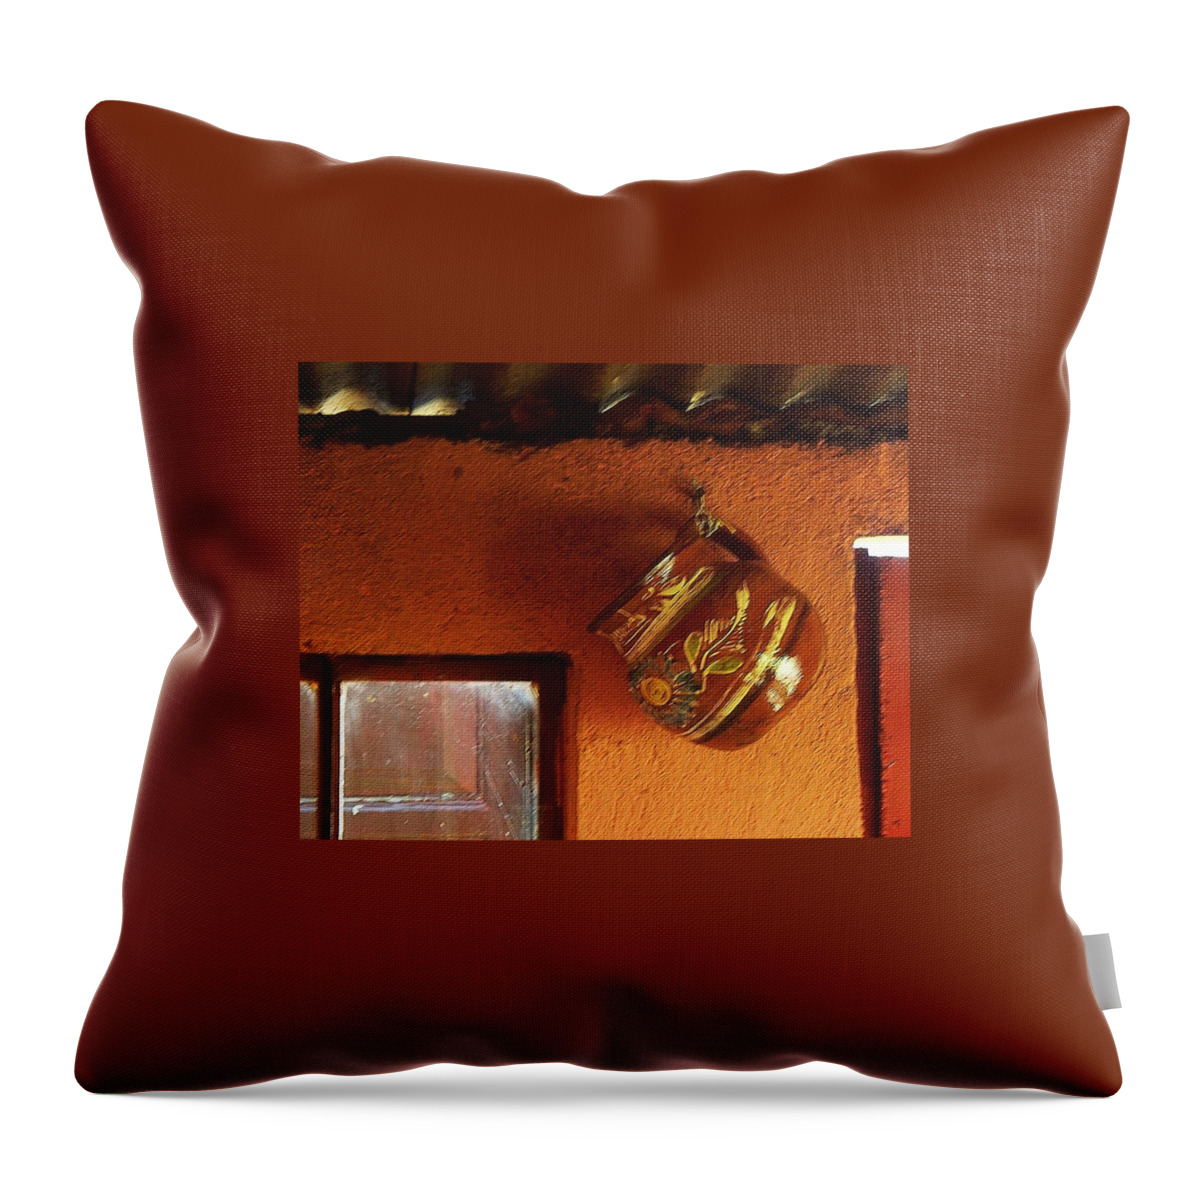 Photography Throw Pillow featuring the photograph Mexican Pottery by Joy Nichols